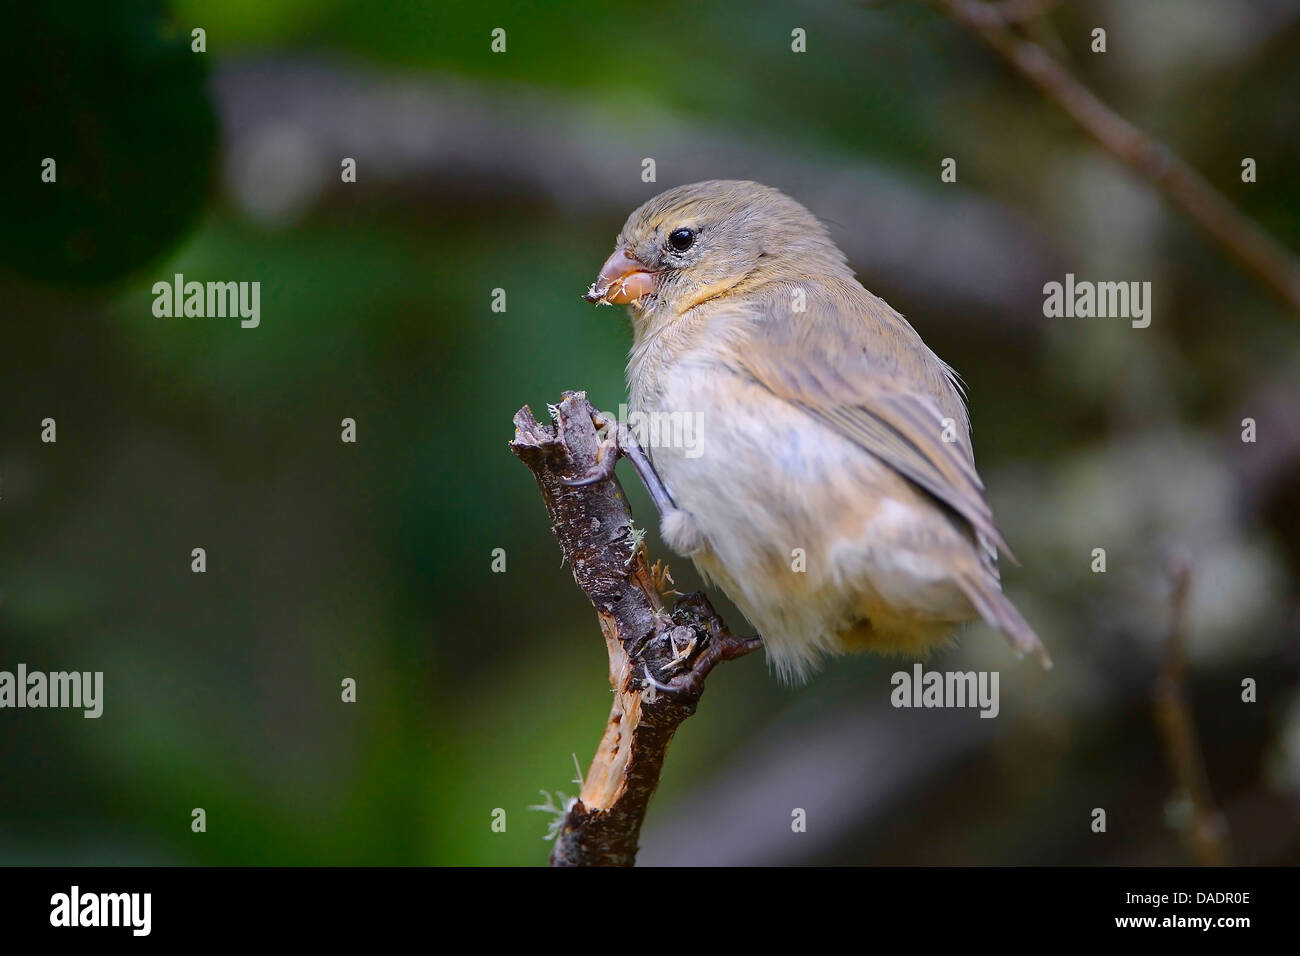 Small insectivorous tree finch, Small tree finch (Camarhynchus parvulus), sitting on a twig, Ecuador, Galapagos Islands, Isabela Stock Photo